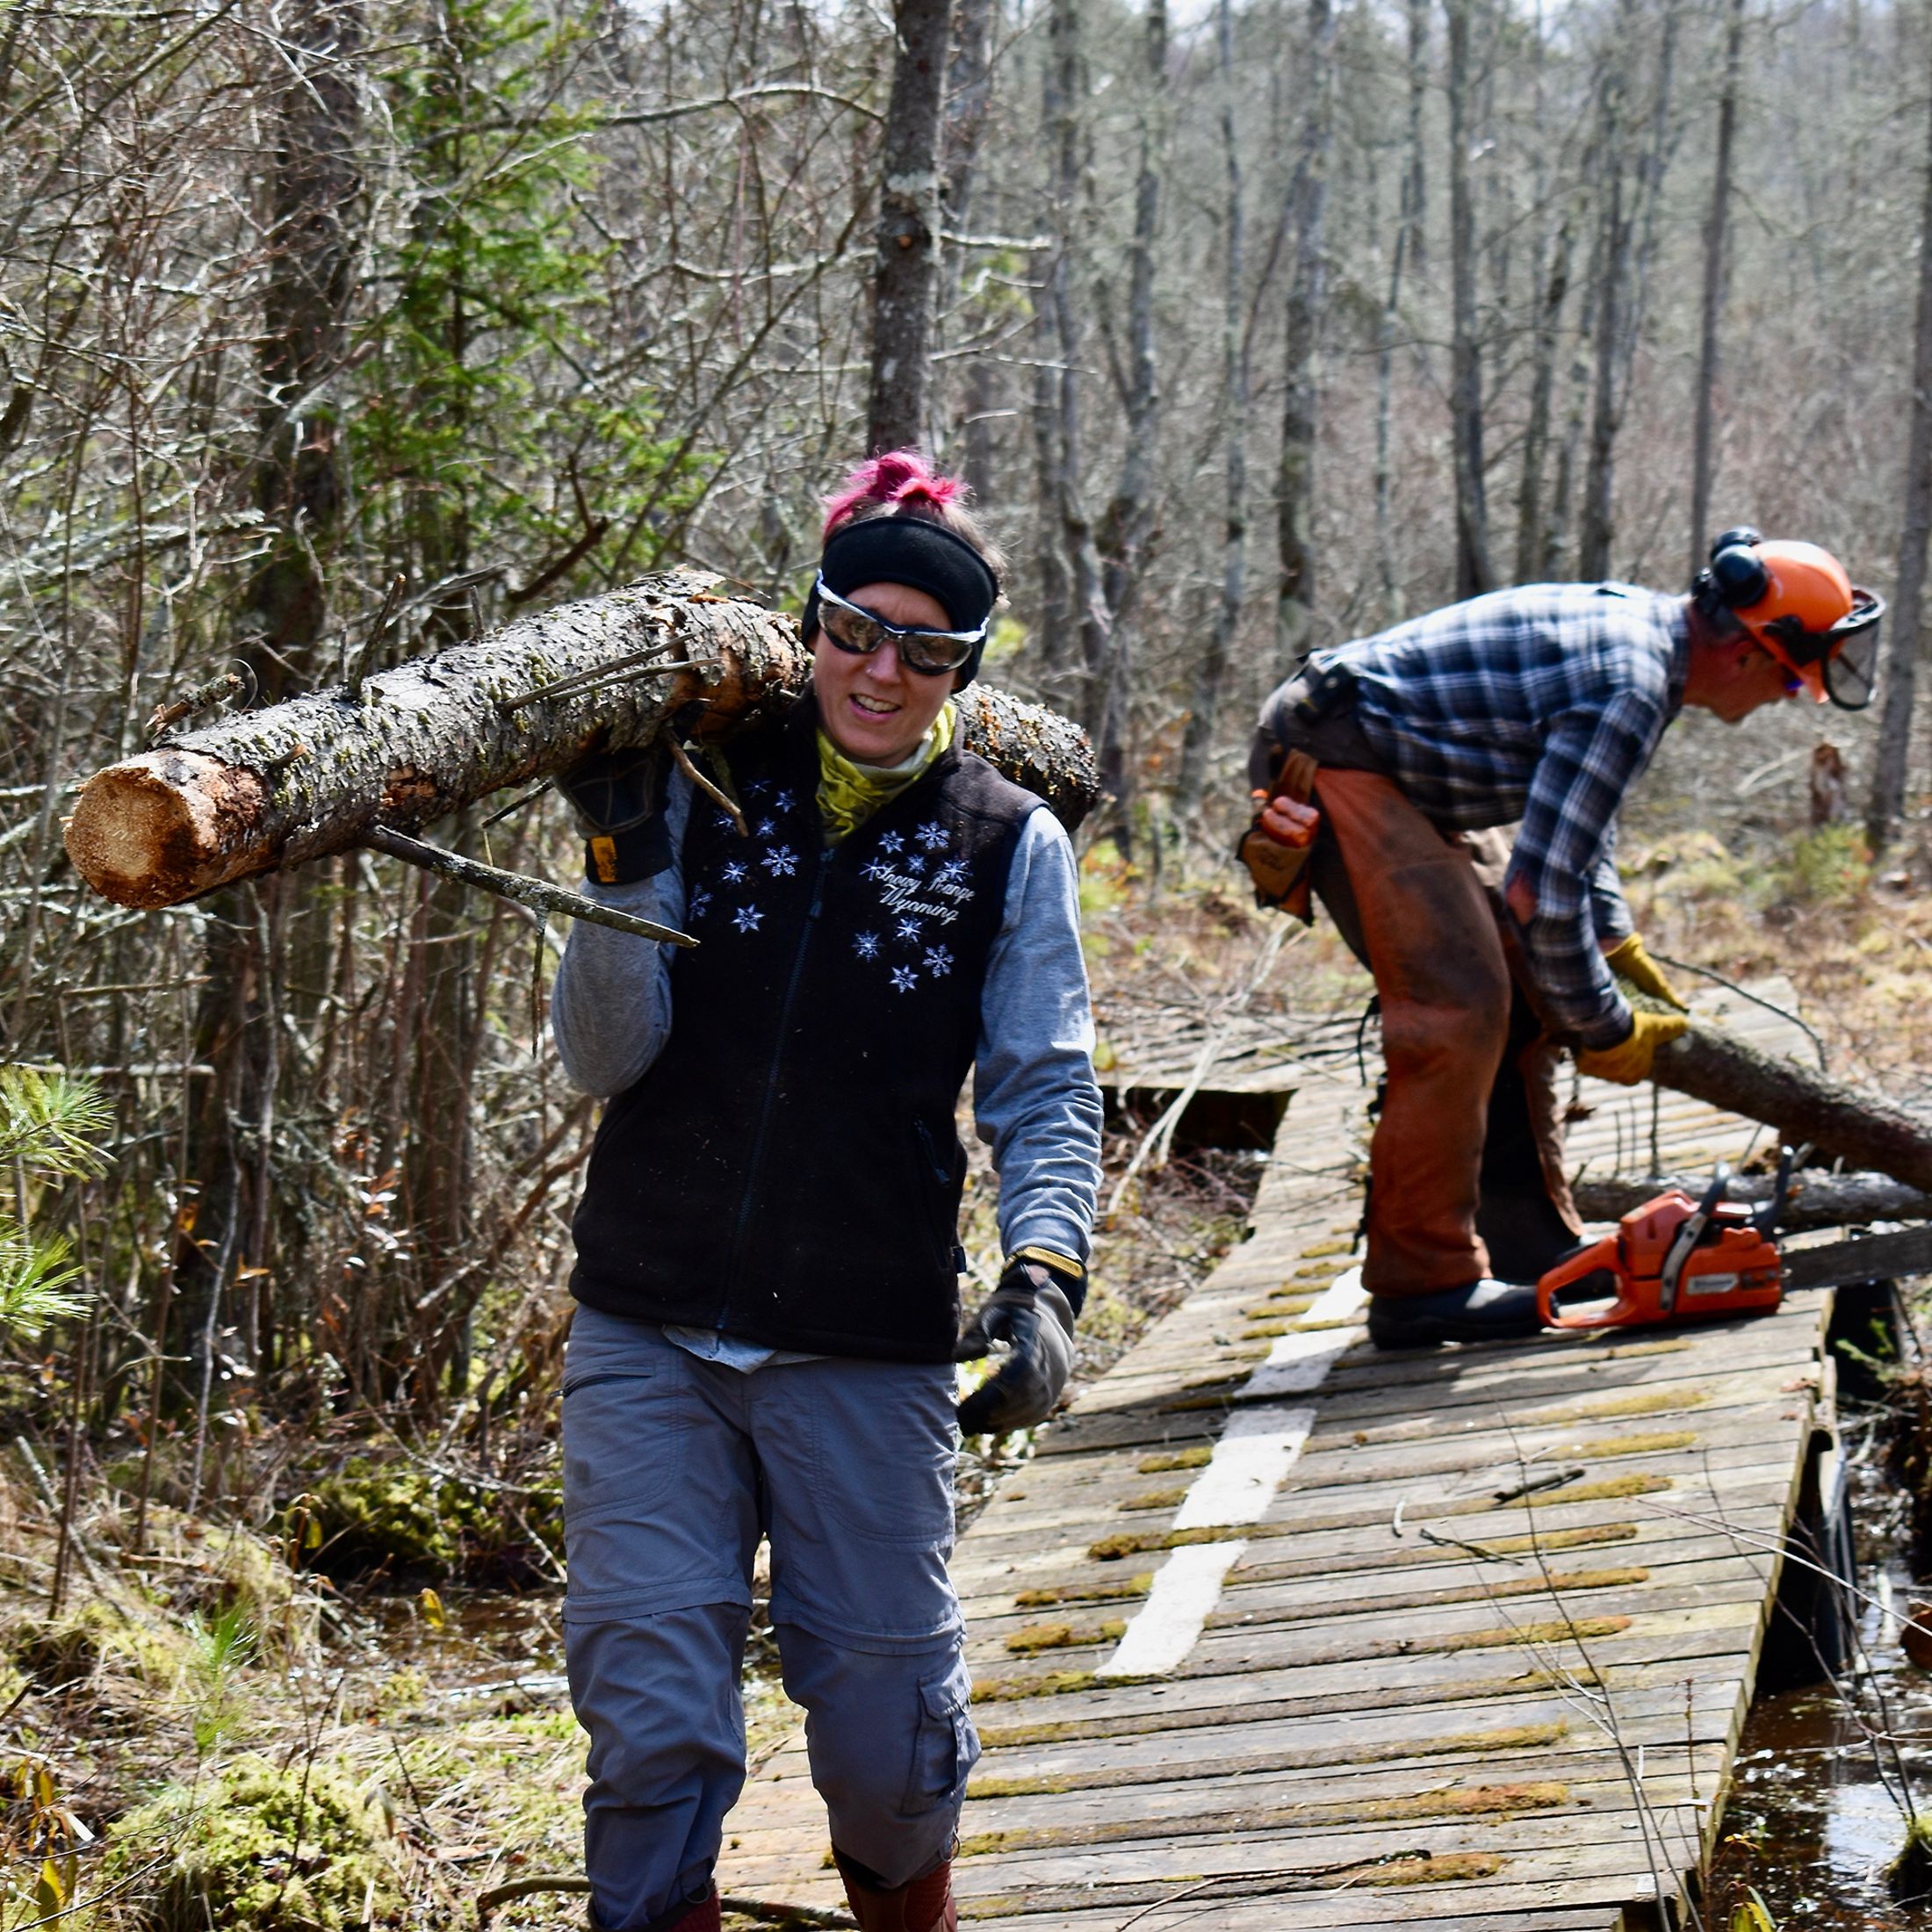 A person carrying a log over their shoulders walks on a wooden boardwalk through the forest.